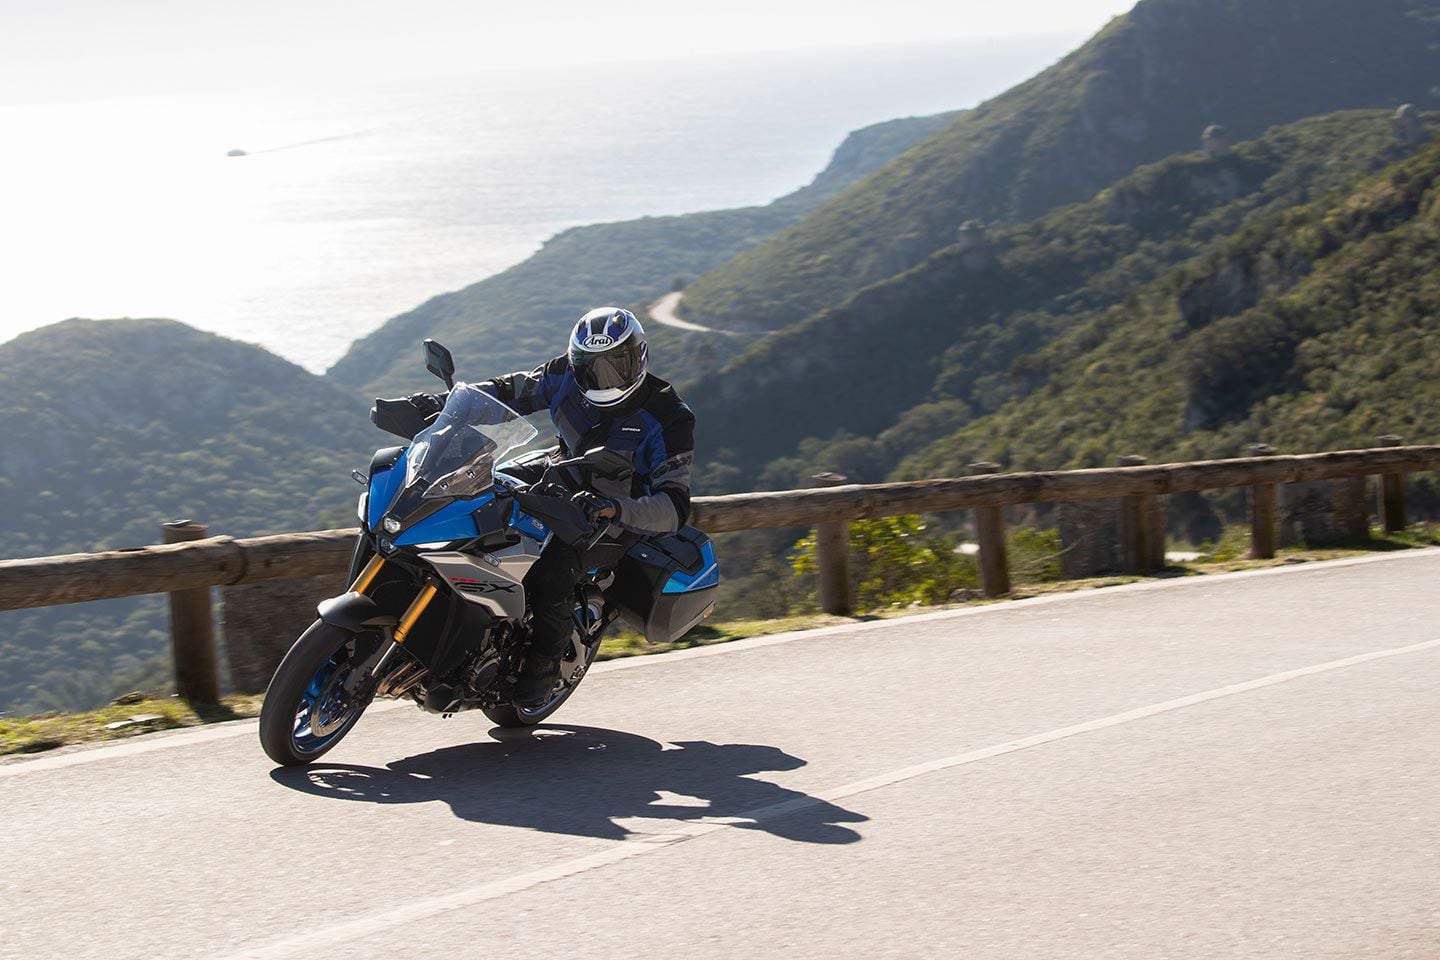 Suzuki’s goal with the GSX-S1000GX+ was versatility. The bike is just as comfortable in the canyons as it is on the highway.